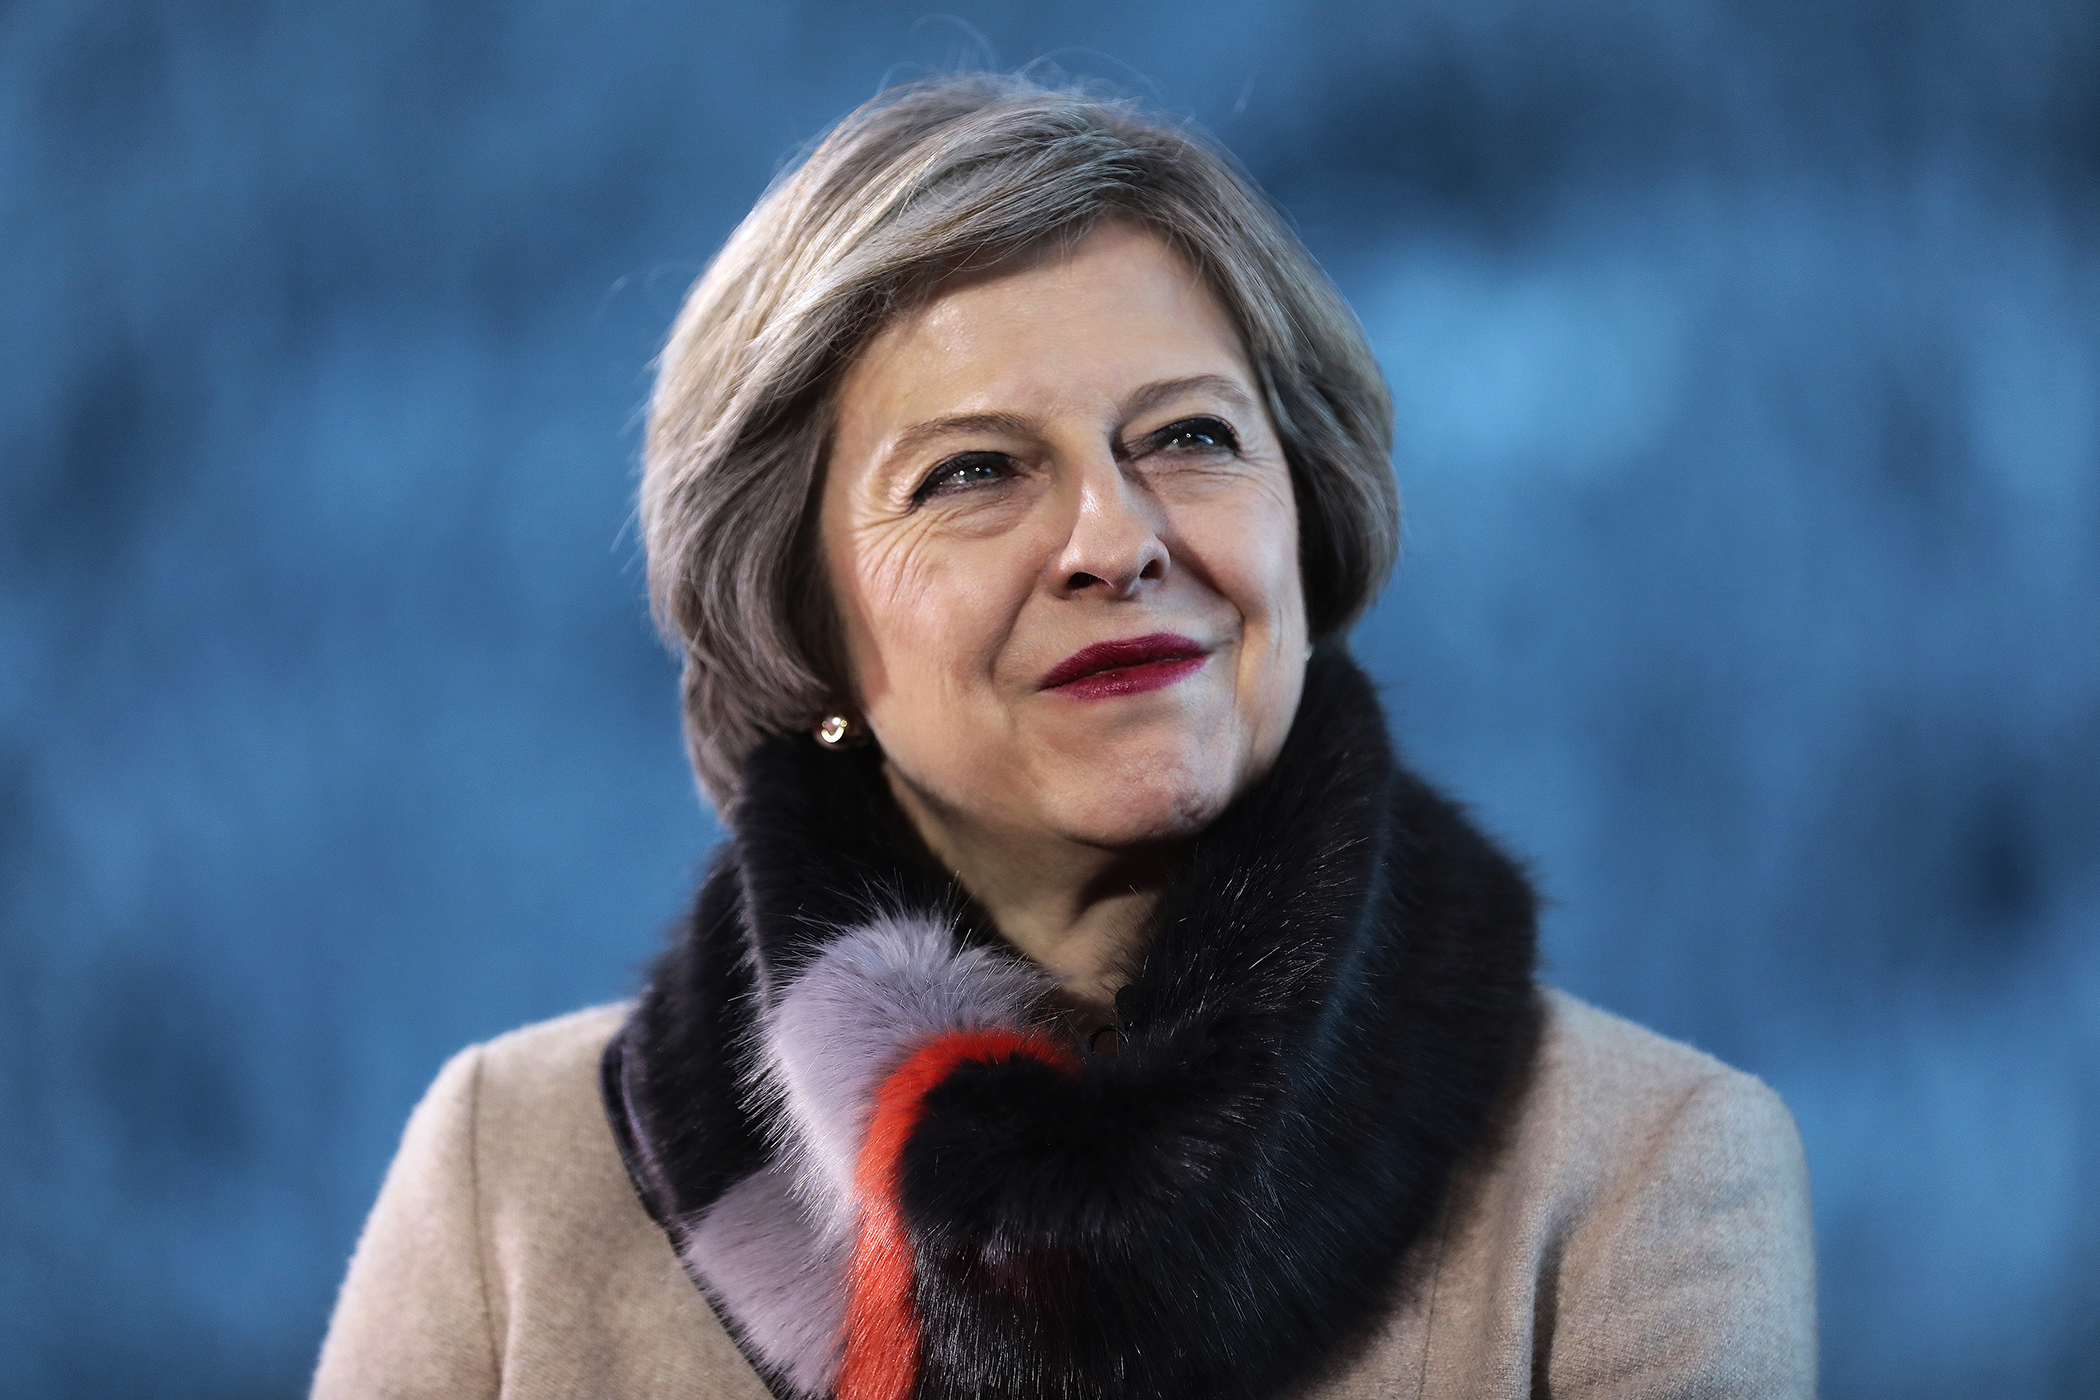 Theresa May at the World Economic Forum in Davos, Switzerland, on Jan. 19, 2017. (Simon Dawson—Bloomberg/Getty Images)